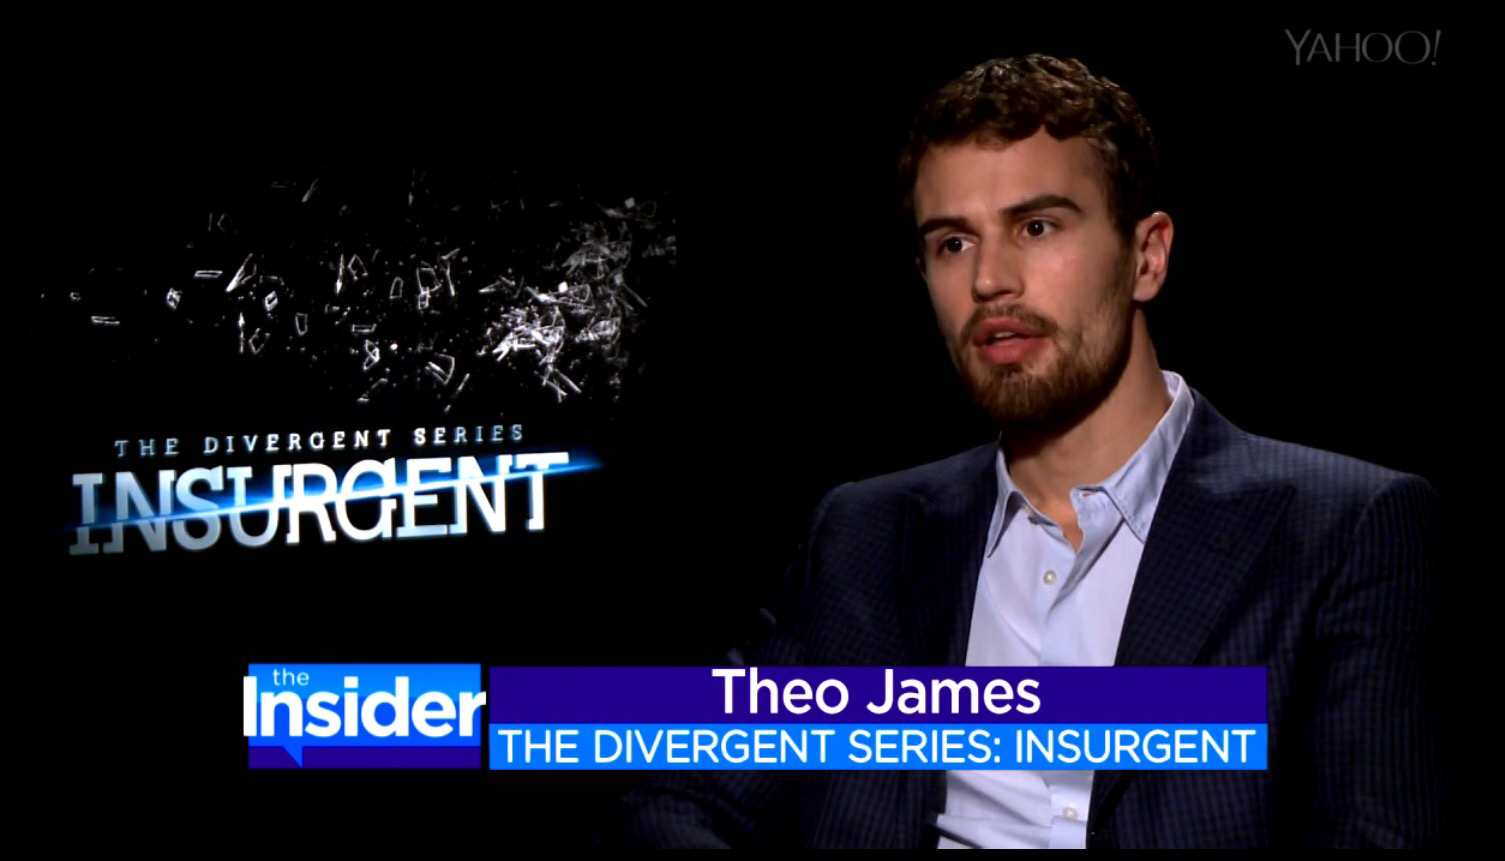 Insurgent Stars Play a Game of “Would You Rather”